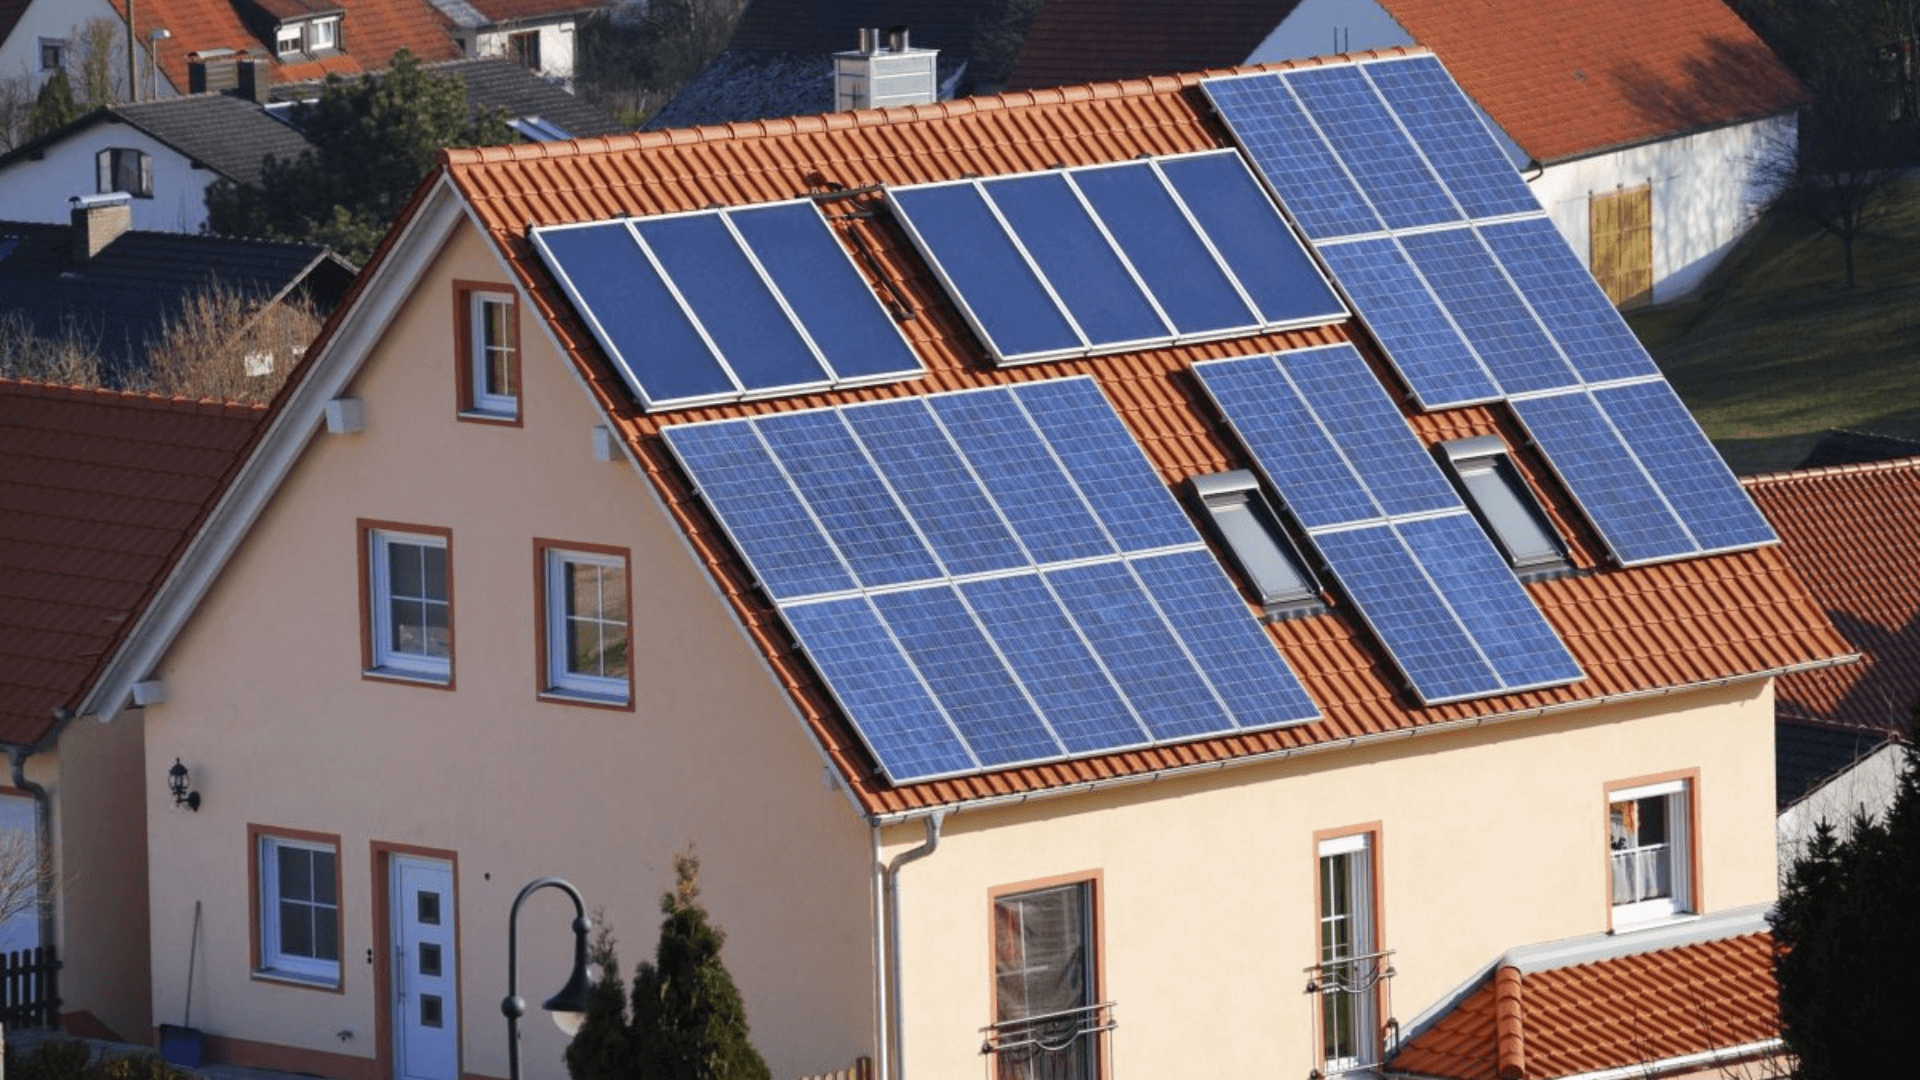 Benefits of installing solar panels on your roof